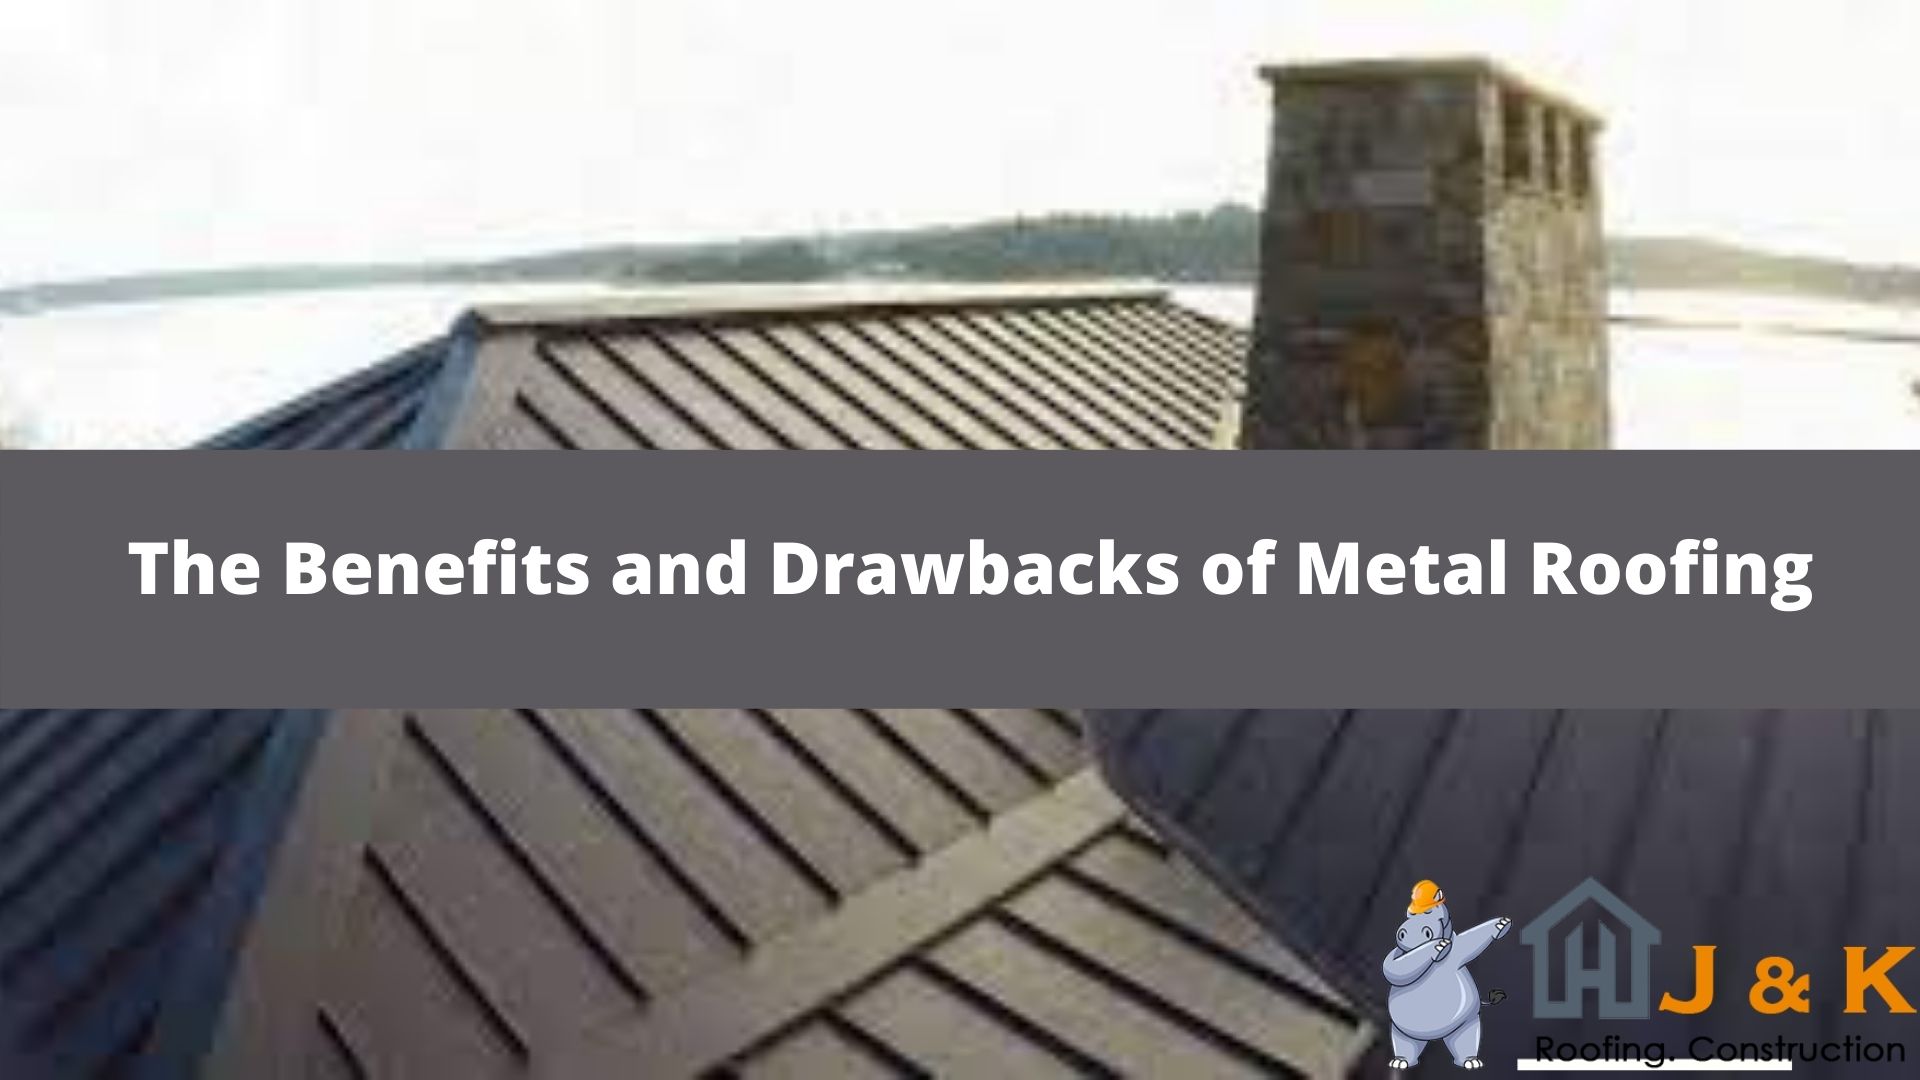 The Benefits and Drawbacks of Metal Roofing